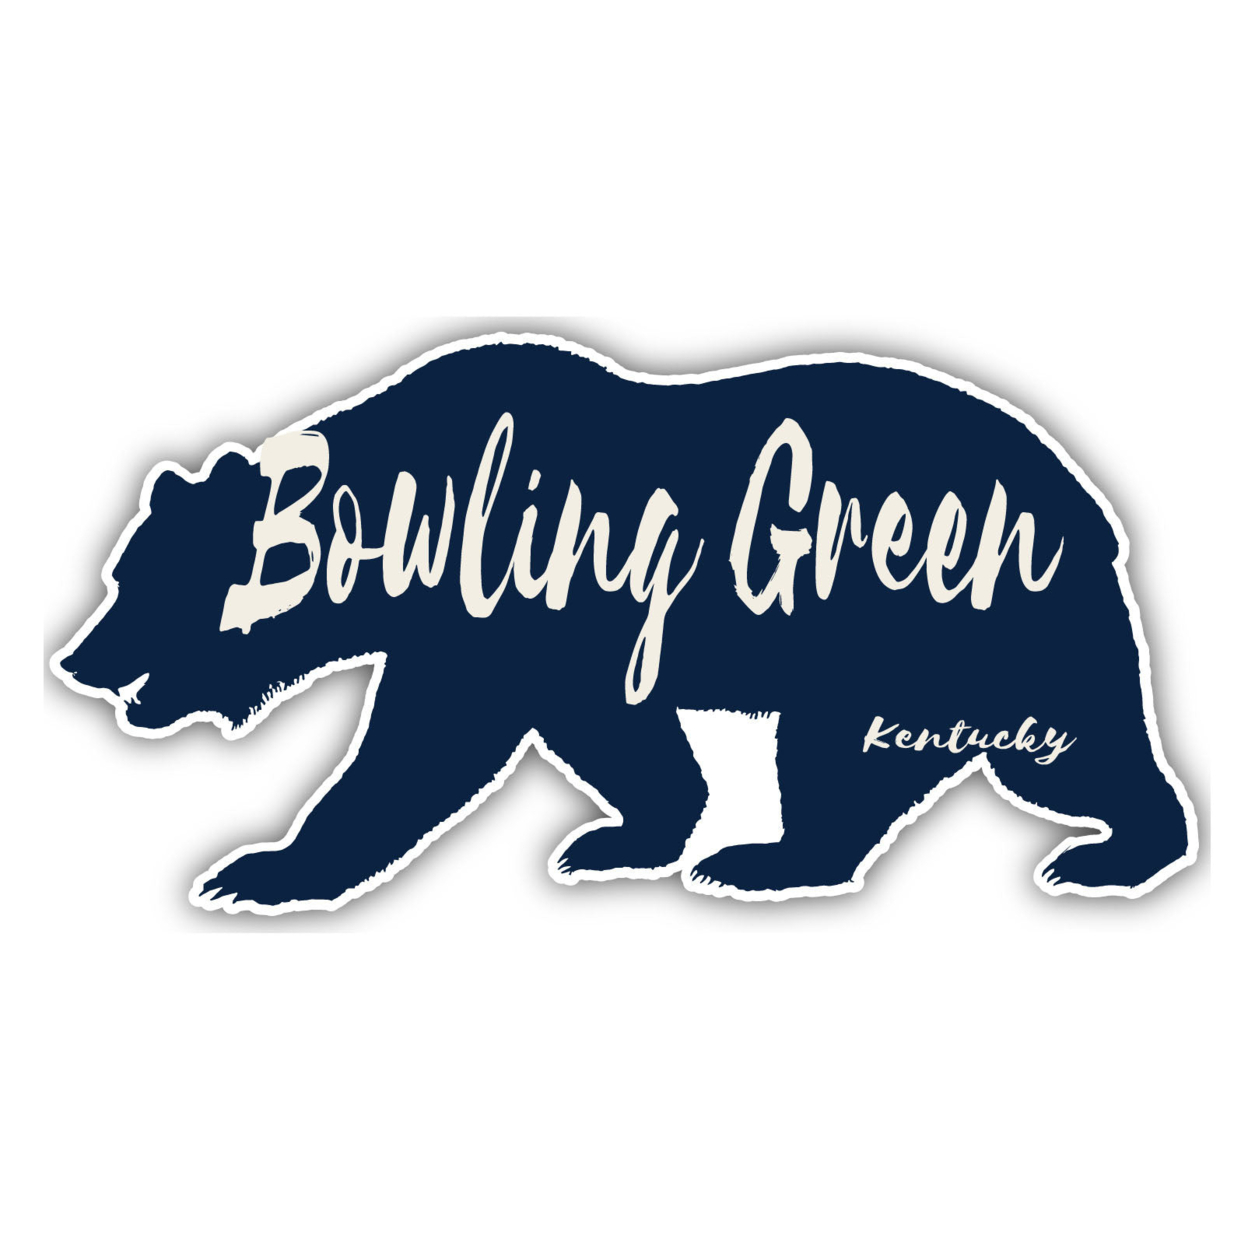 Bowling Green Kentucky Souvenir Decorative Stickers (Choose Theme And Size) - 4-Pack, 8-Inch, Tent